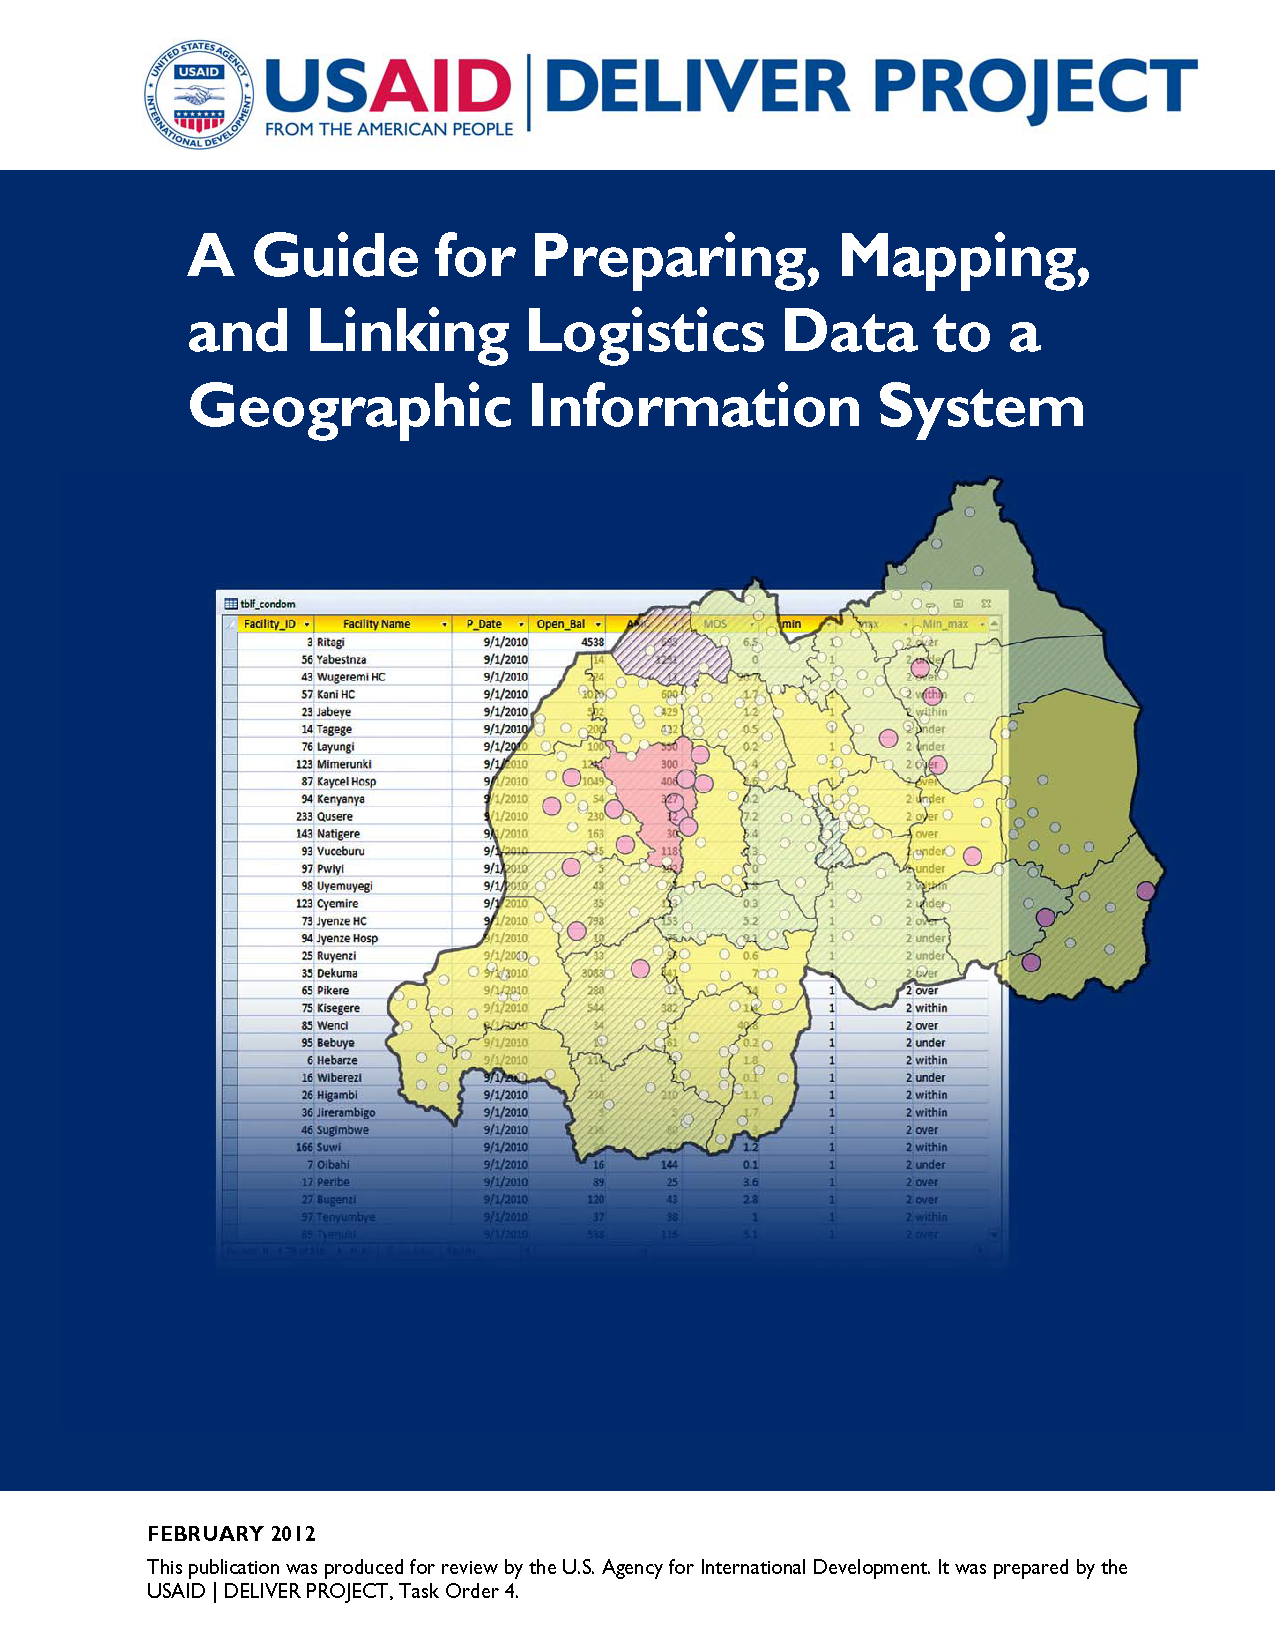 Cover Mapping, and Linking Data to GIS